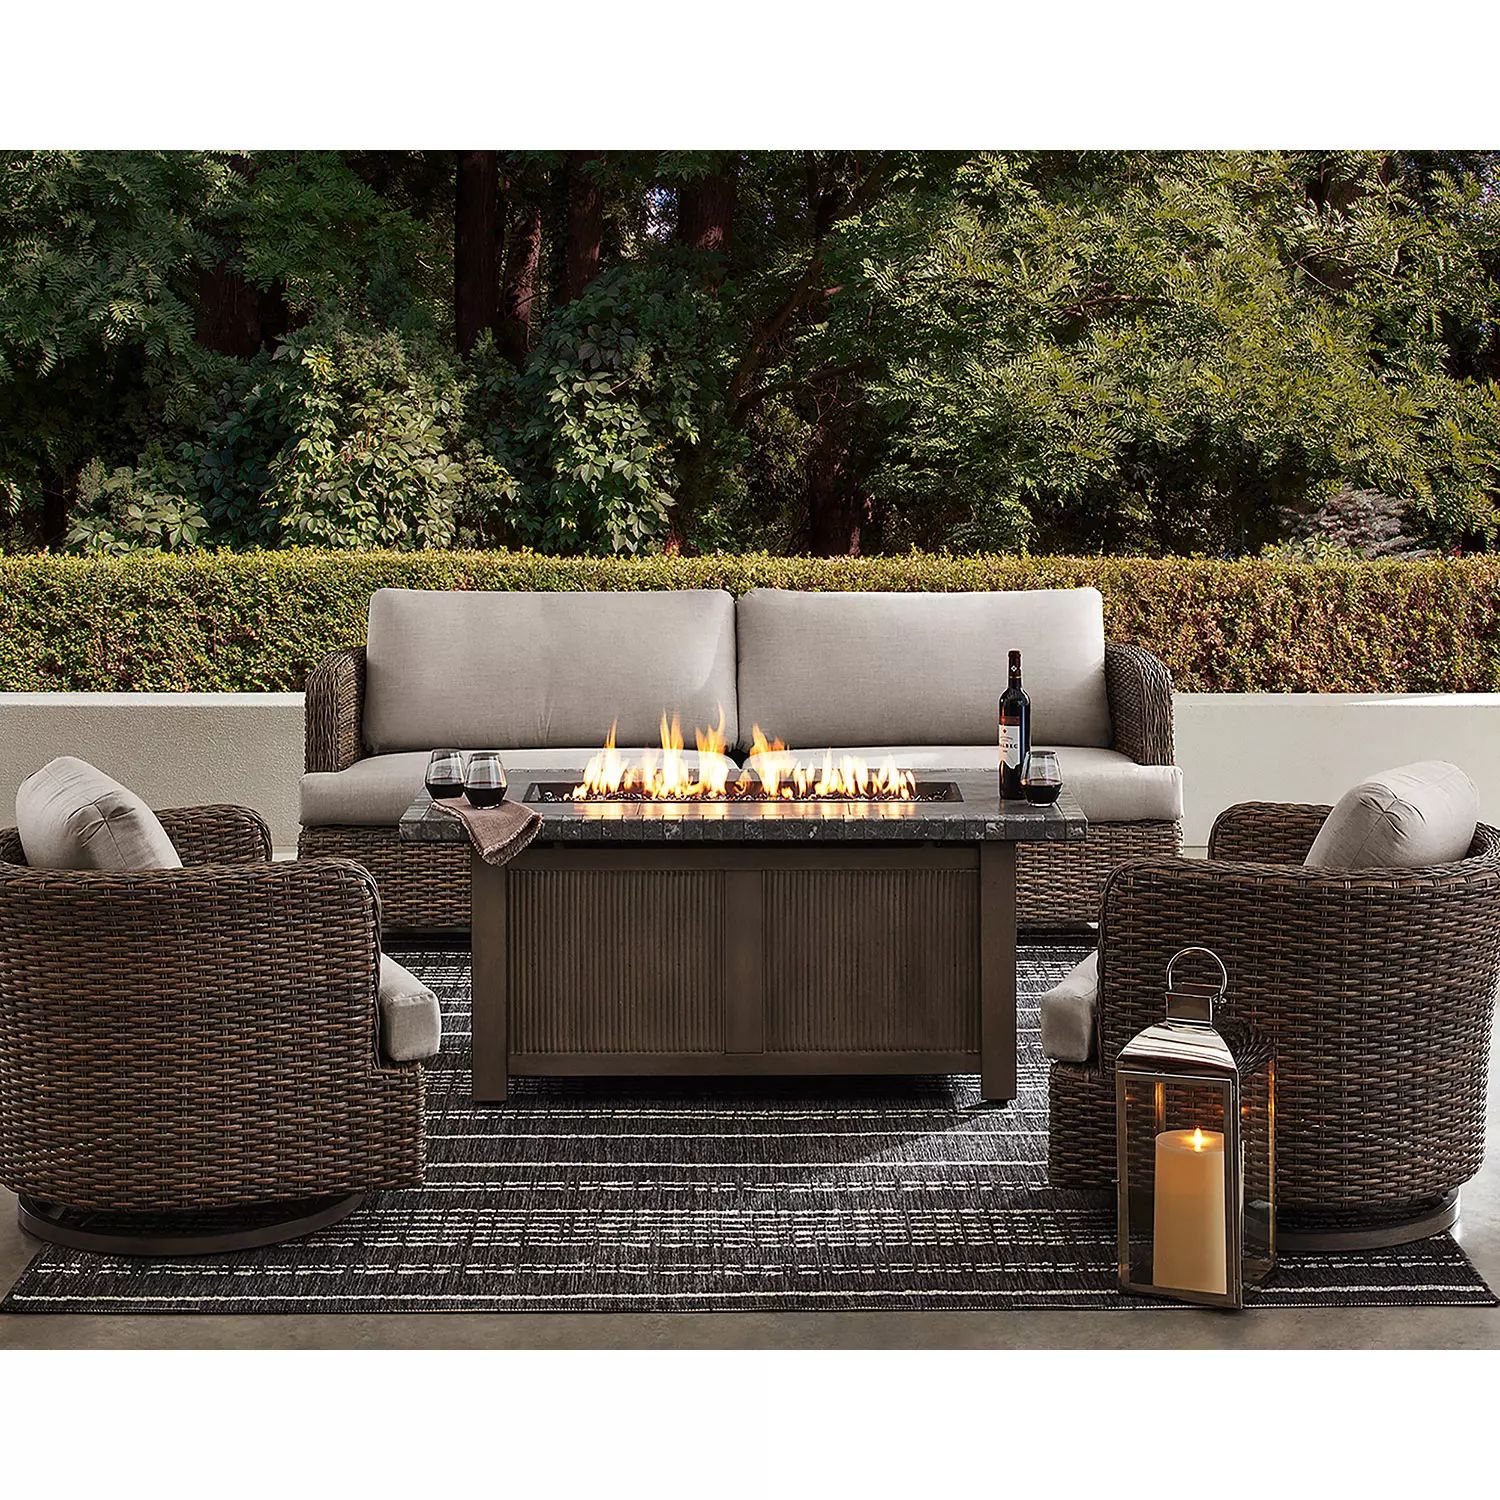 Member's Mark Brexley 4-Piece Deep Seating Set with Fire | Sam's Club